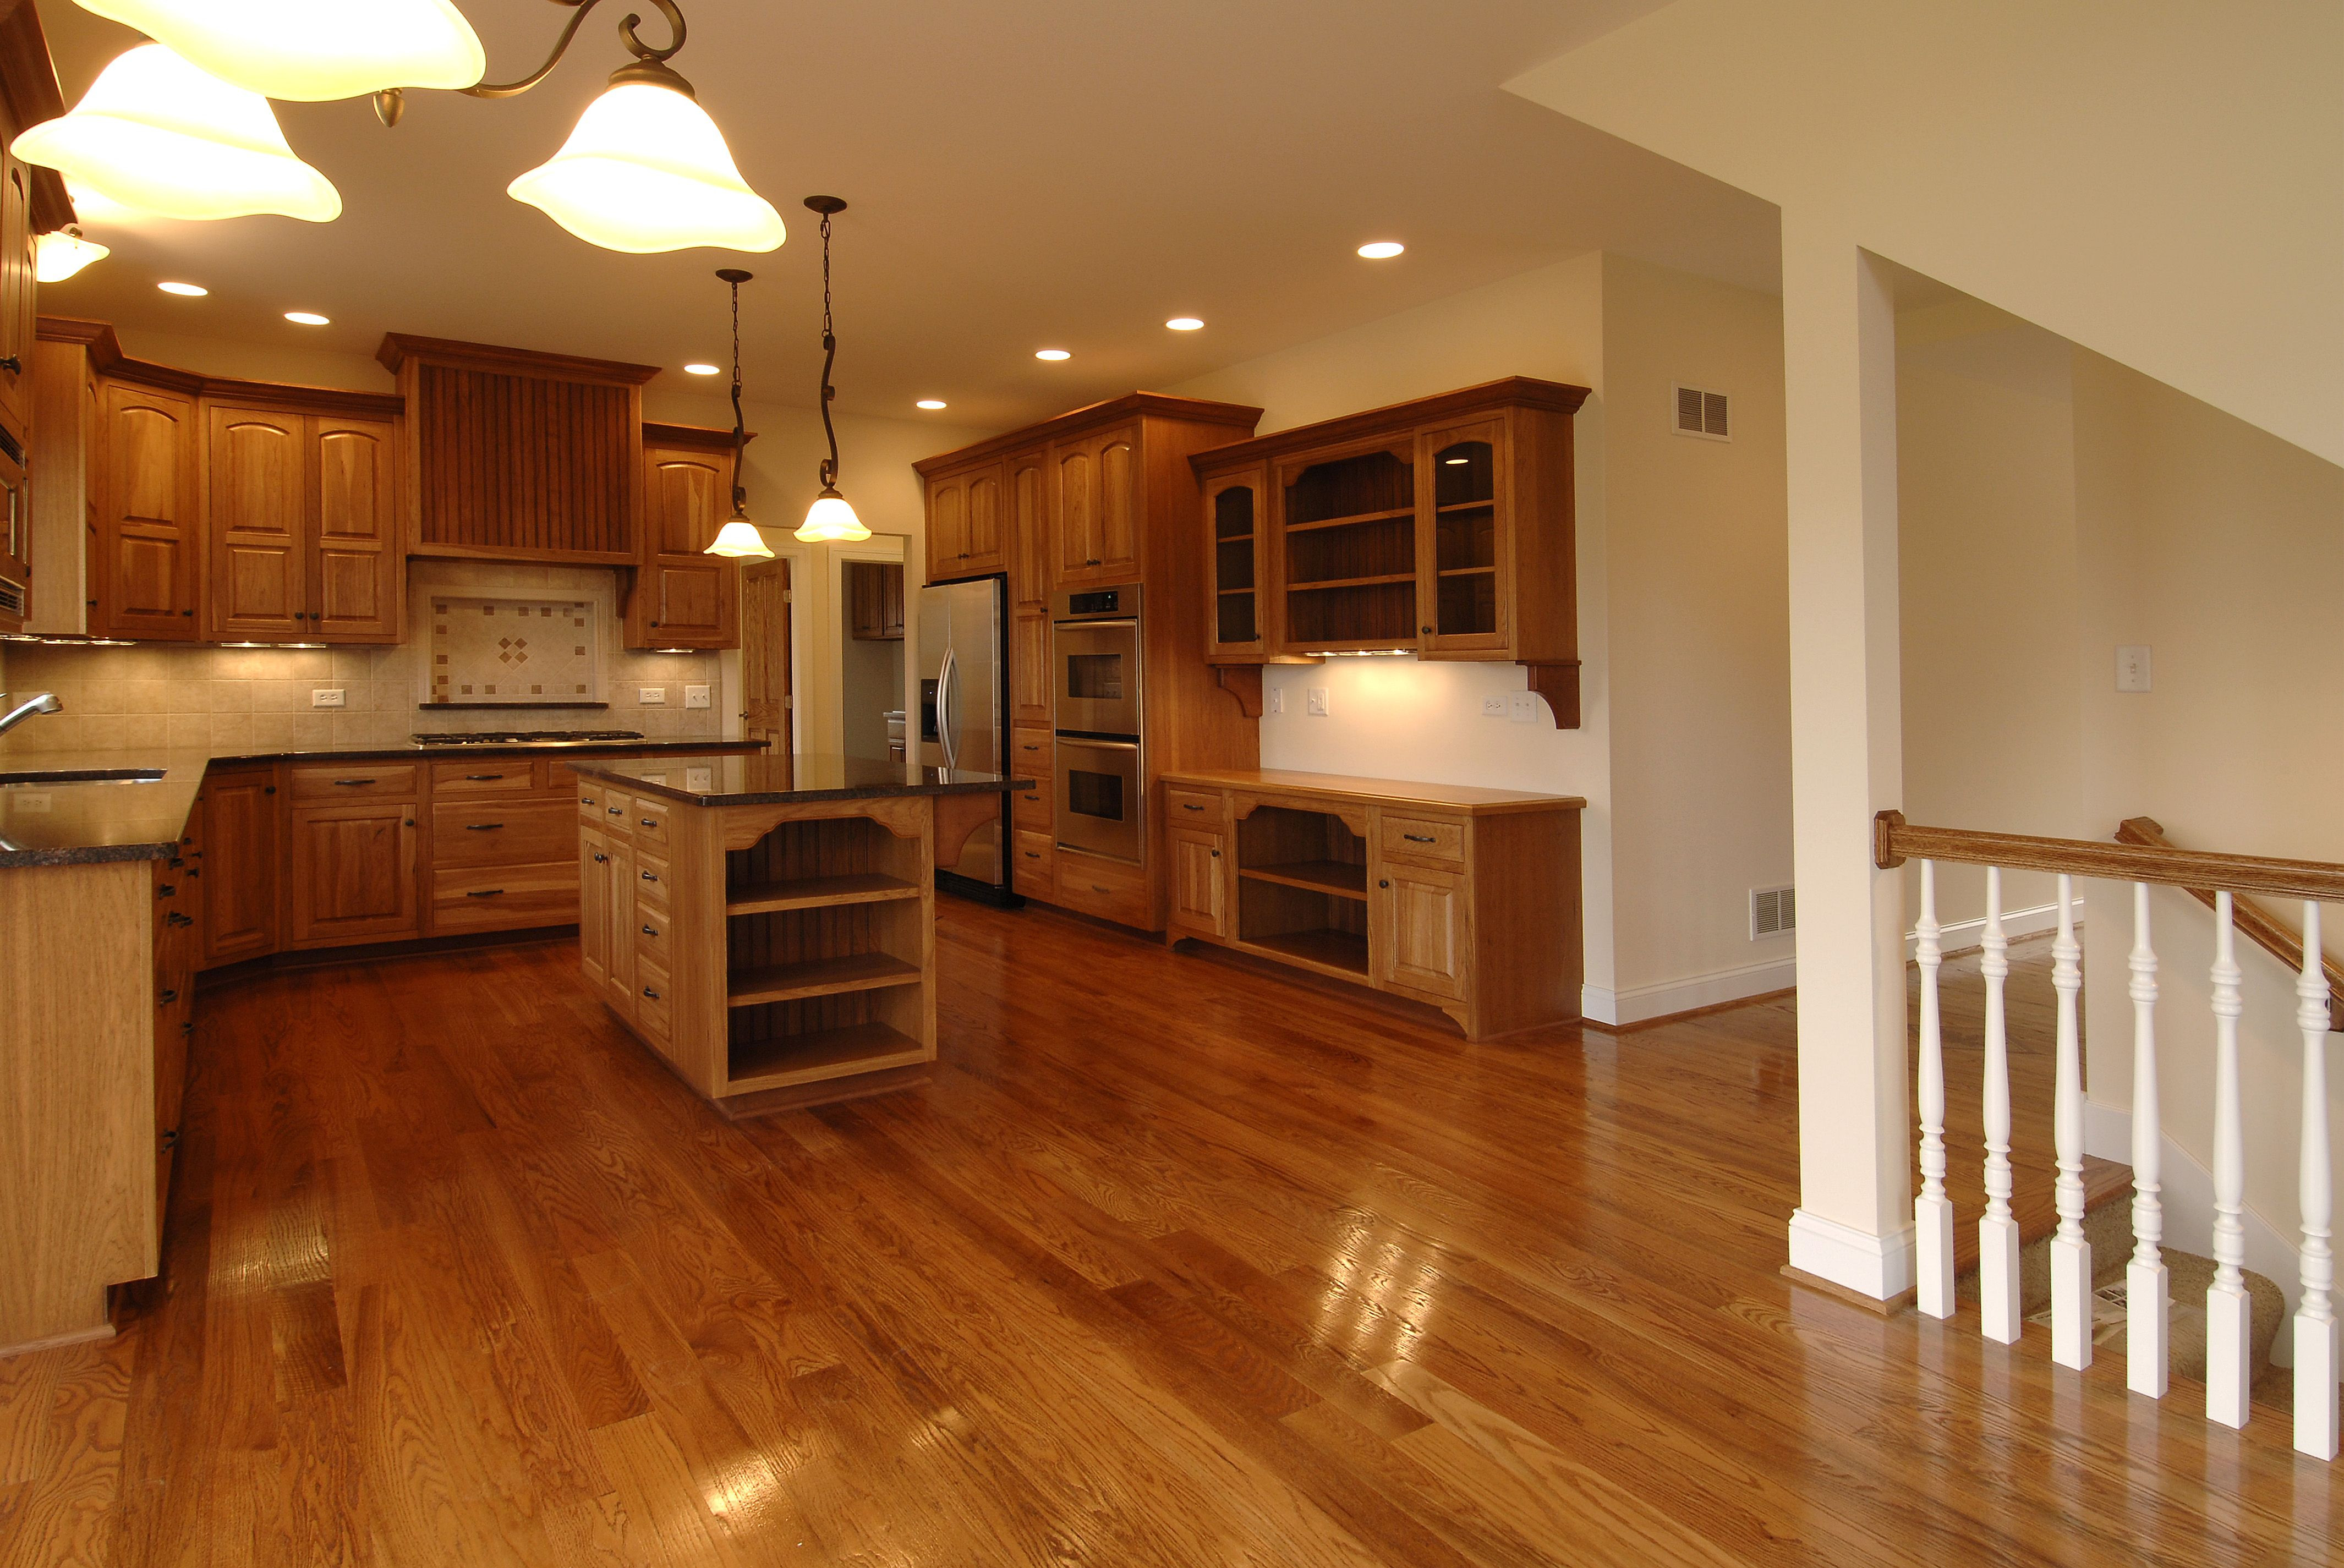 15 Recommended High End Hardwood Flooring Company 2024 free download high end hardwood flooring company of rave reviews southwest suburbs 1 hardwood flooring company with regard to rave reviews southwest suburbs 1 hardwood flooring company